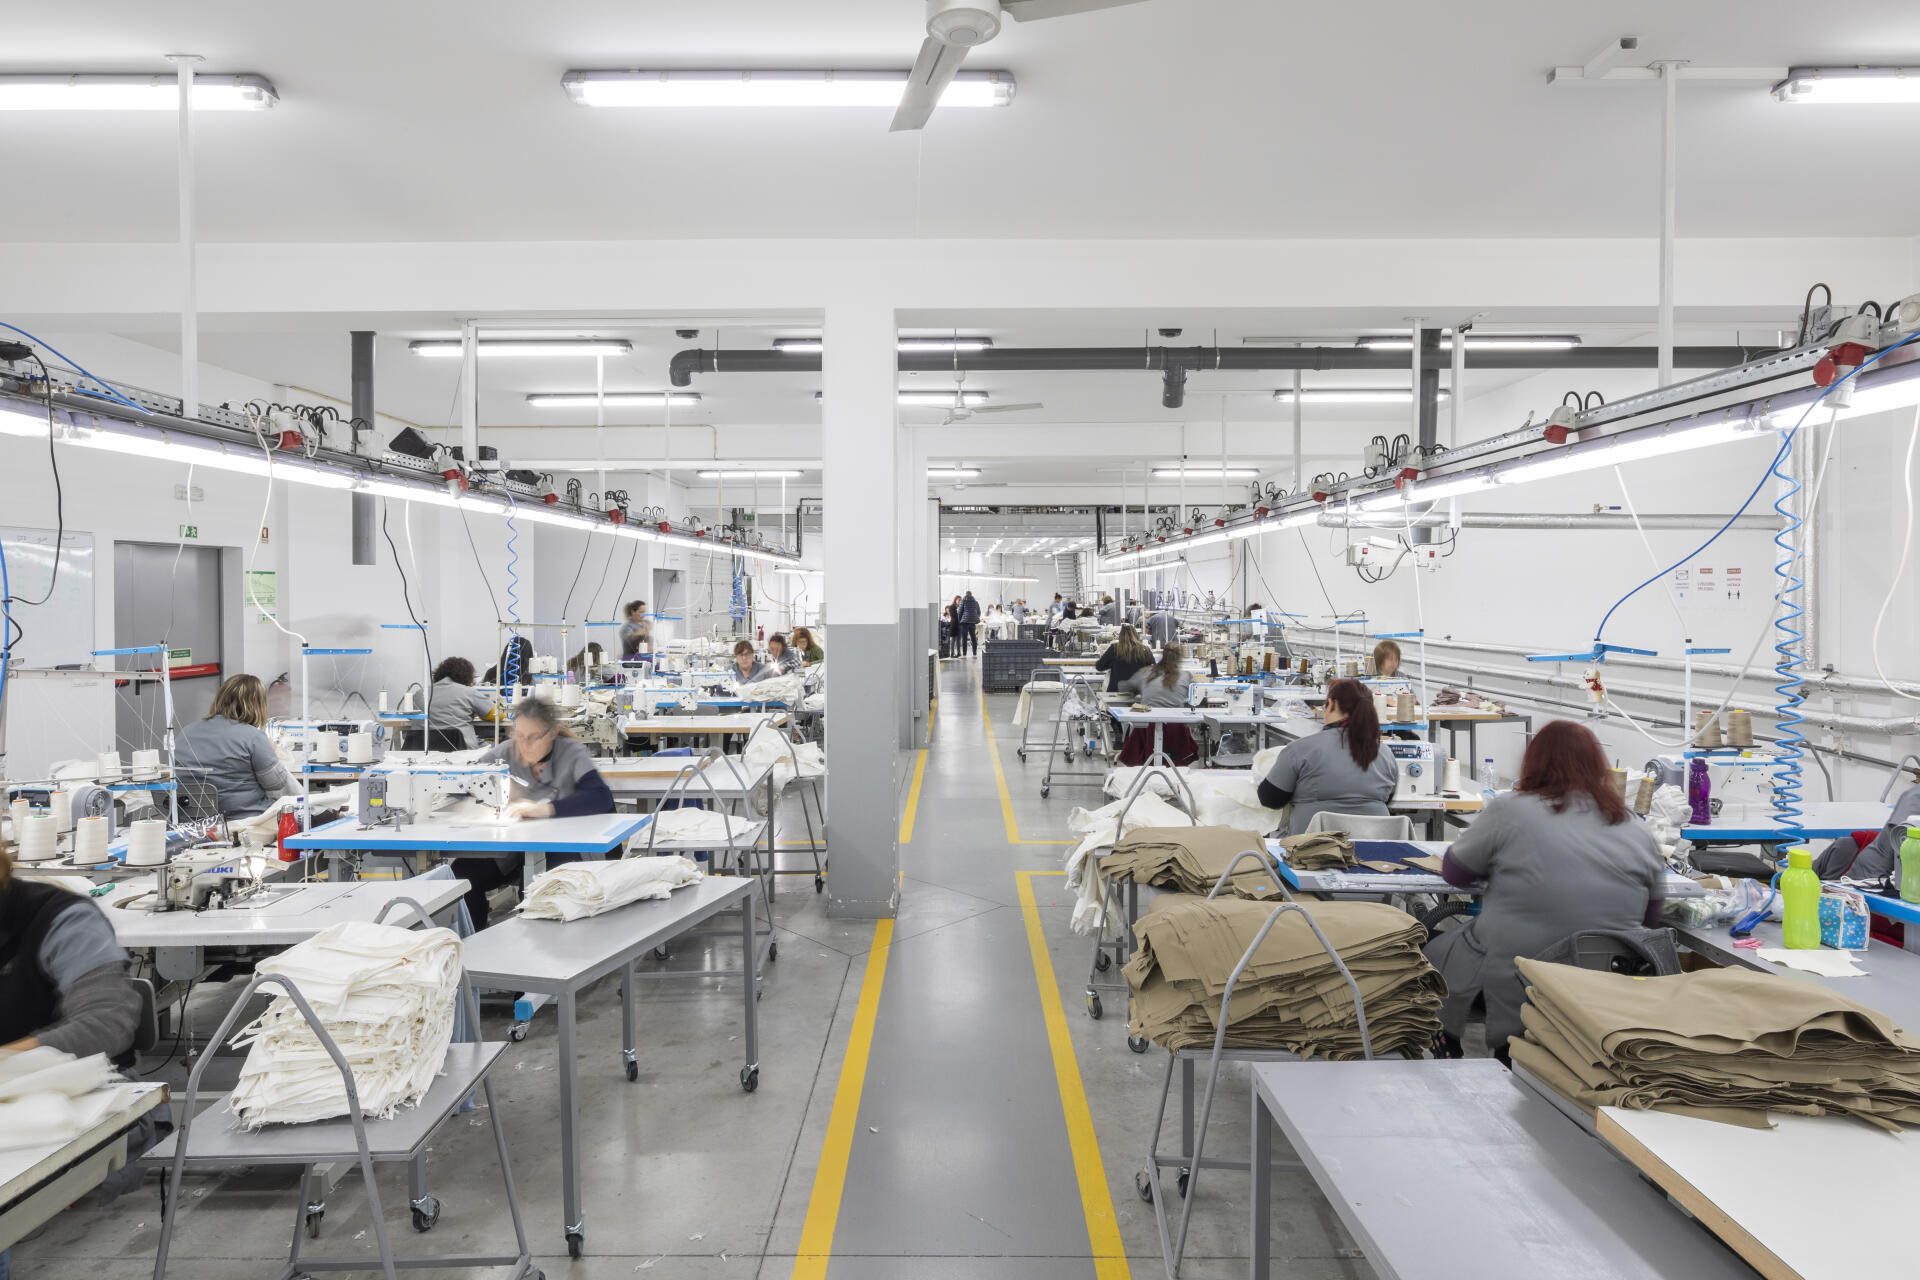 The factory has 3 production lines.  Each seamstress takes care of a part of the room, doing different types of sewing.  In Esmeriz, Portugal, on April 4, 2022.